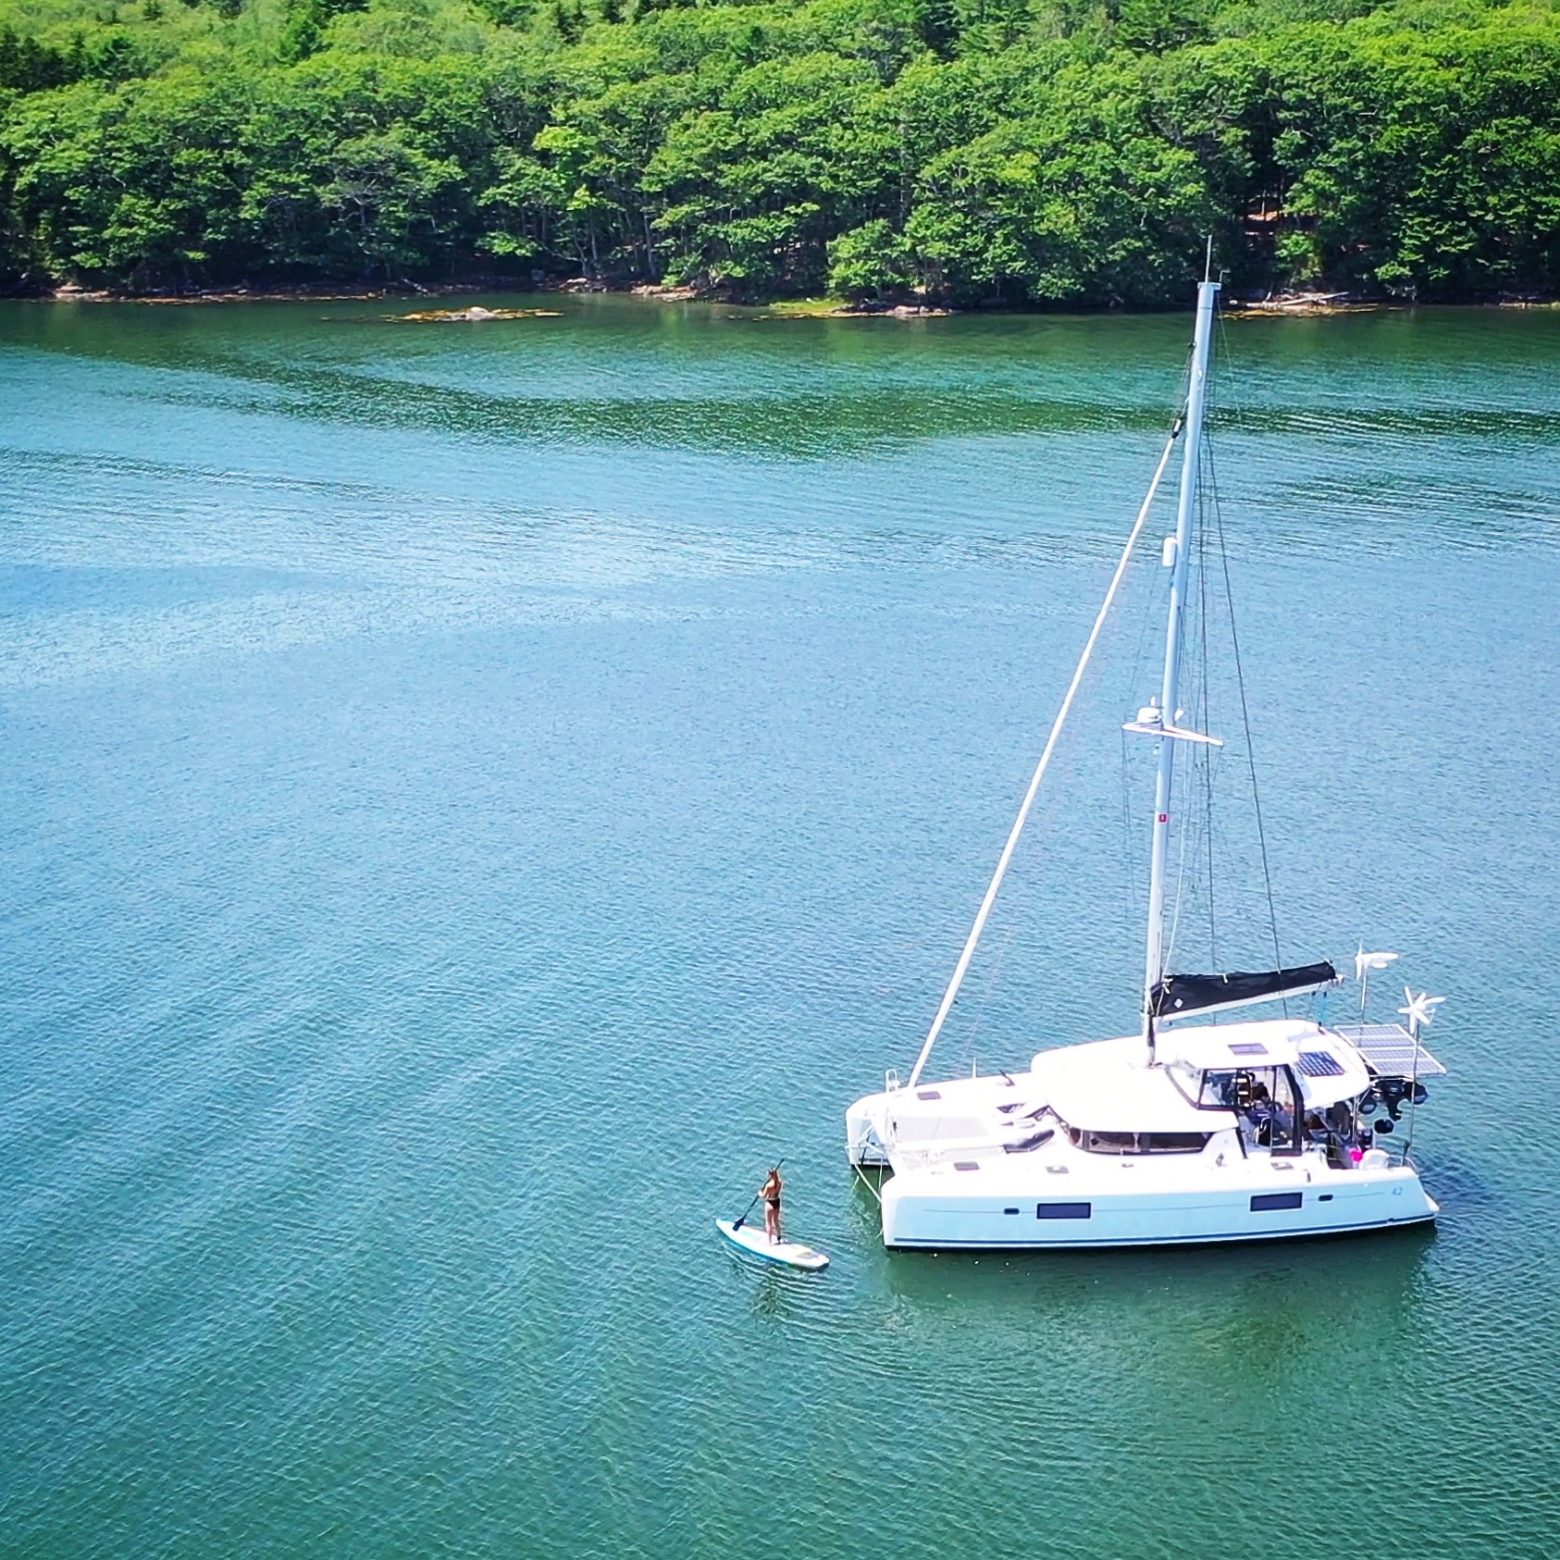 6 Things That Change When You Move Onto a Boat